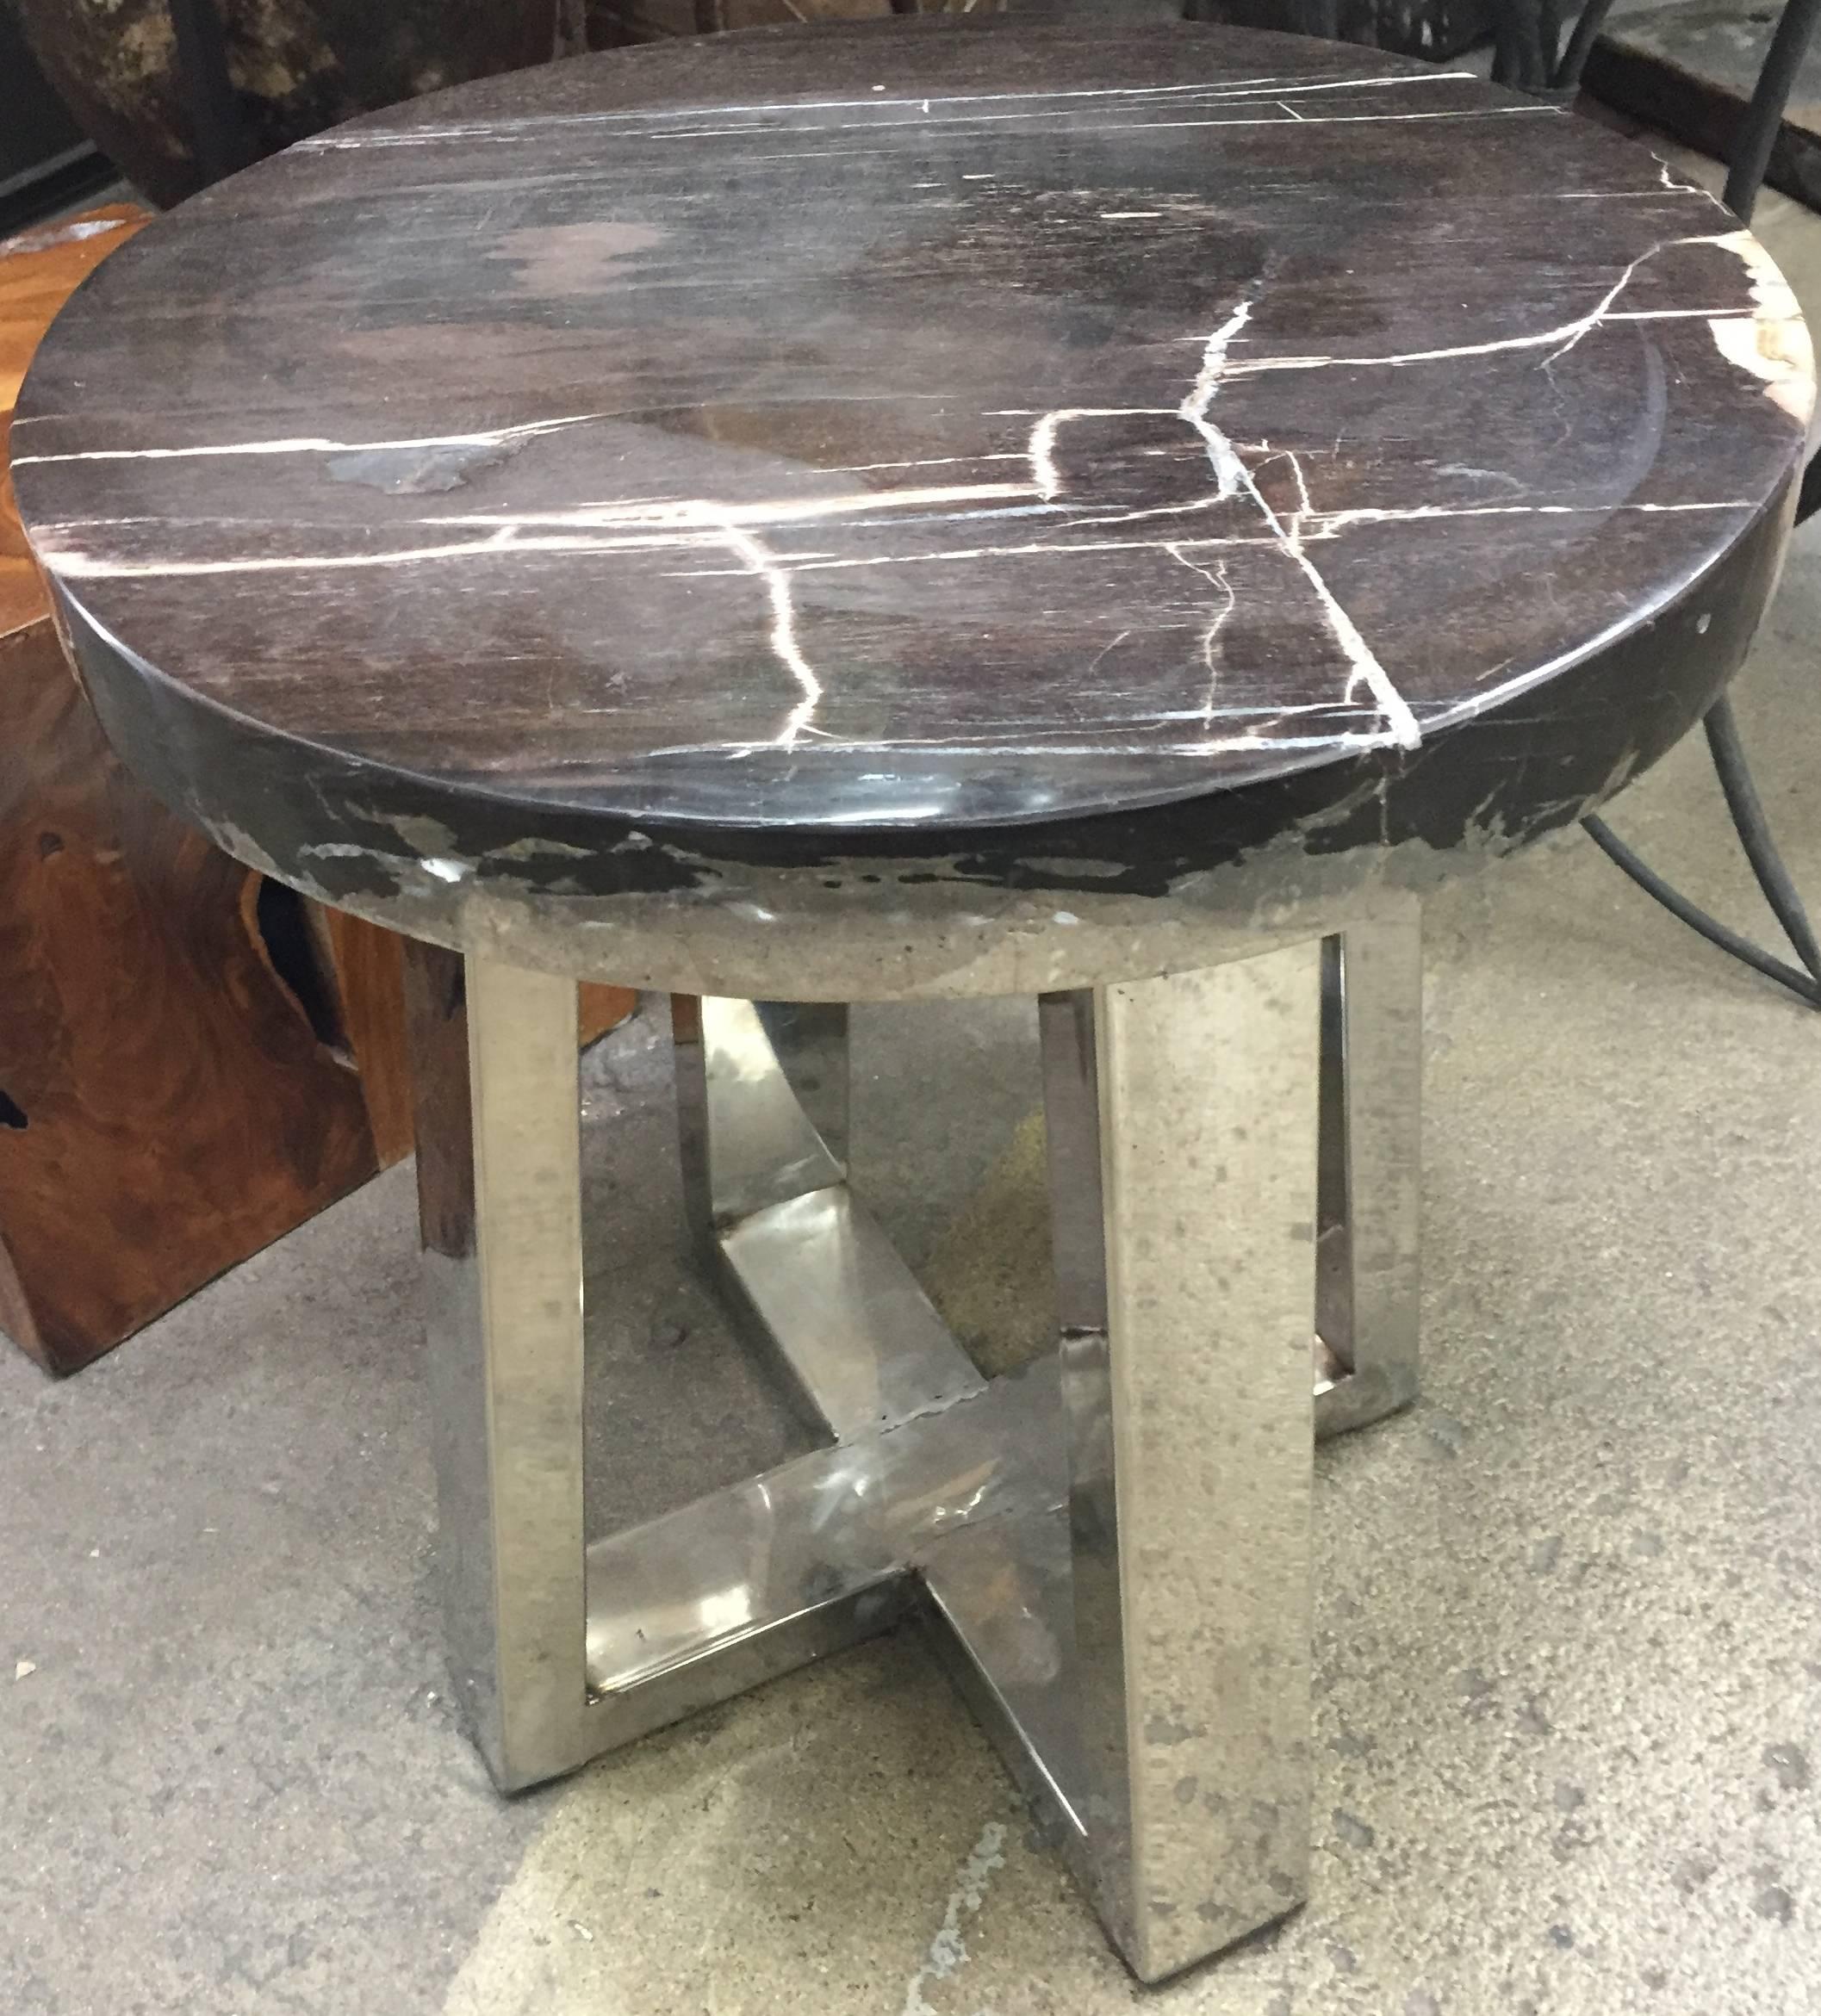 These petrified wood and chrome table come in different slab colors. Please designate preference.